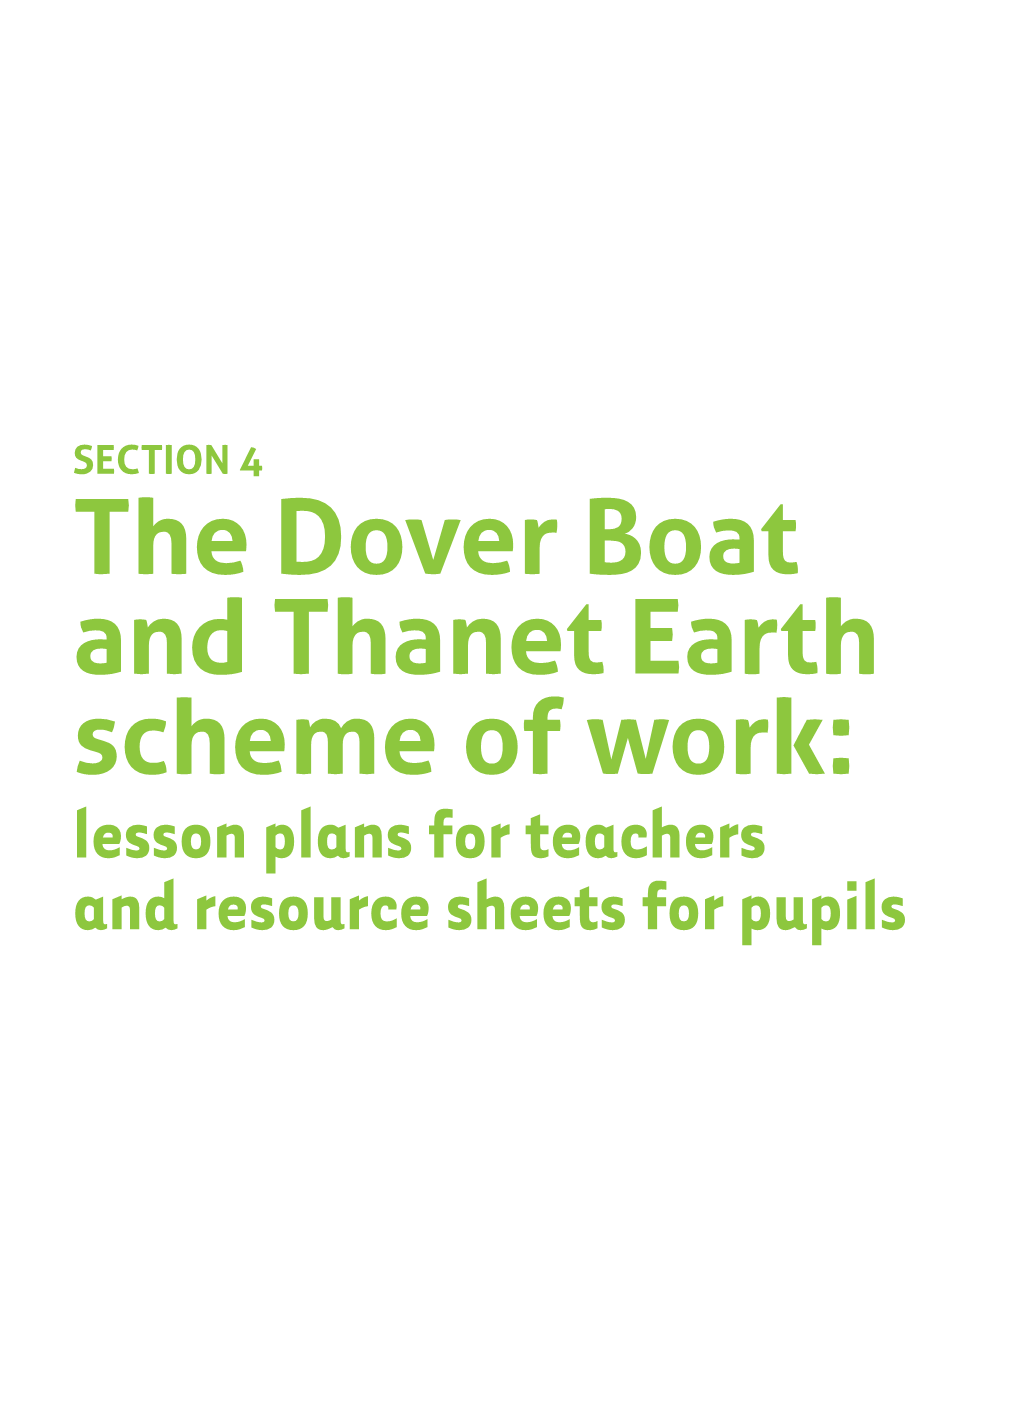 The Dover Boat and Thanet Earth Scheme of Work: Lesson Plans for Teachers and Resource Sheets for Pupils SECTION 4